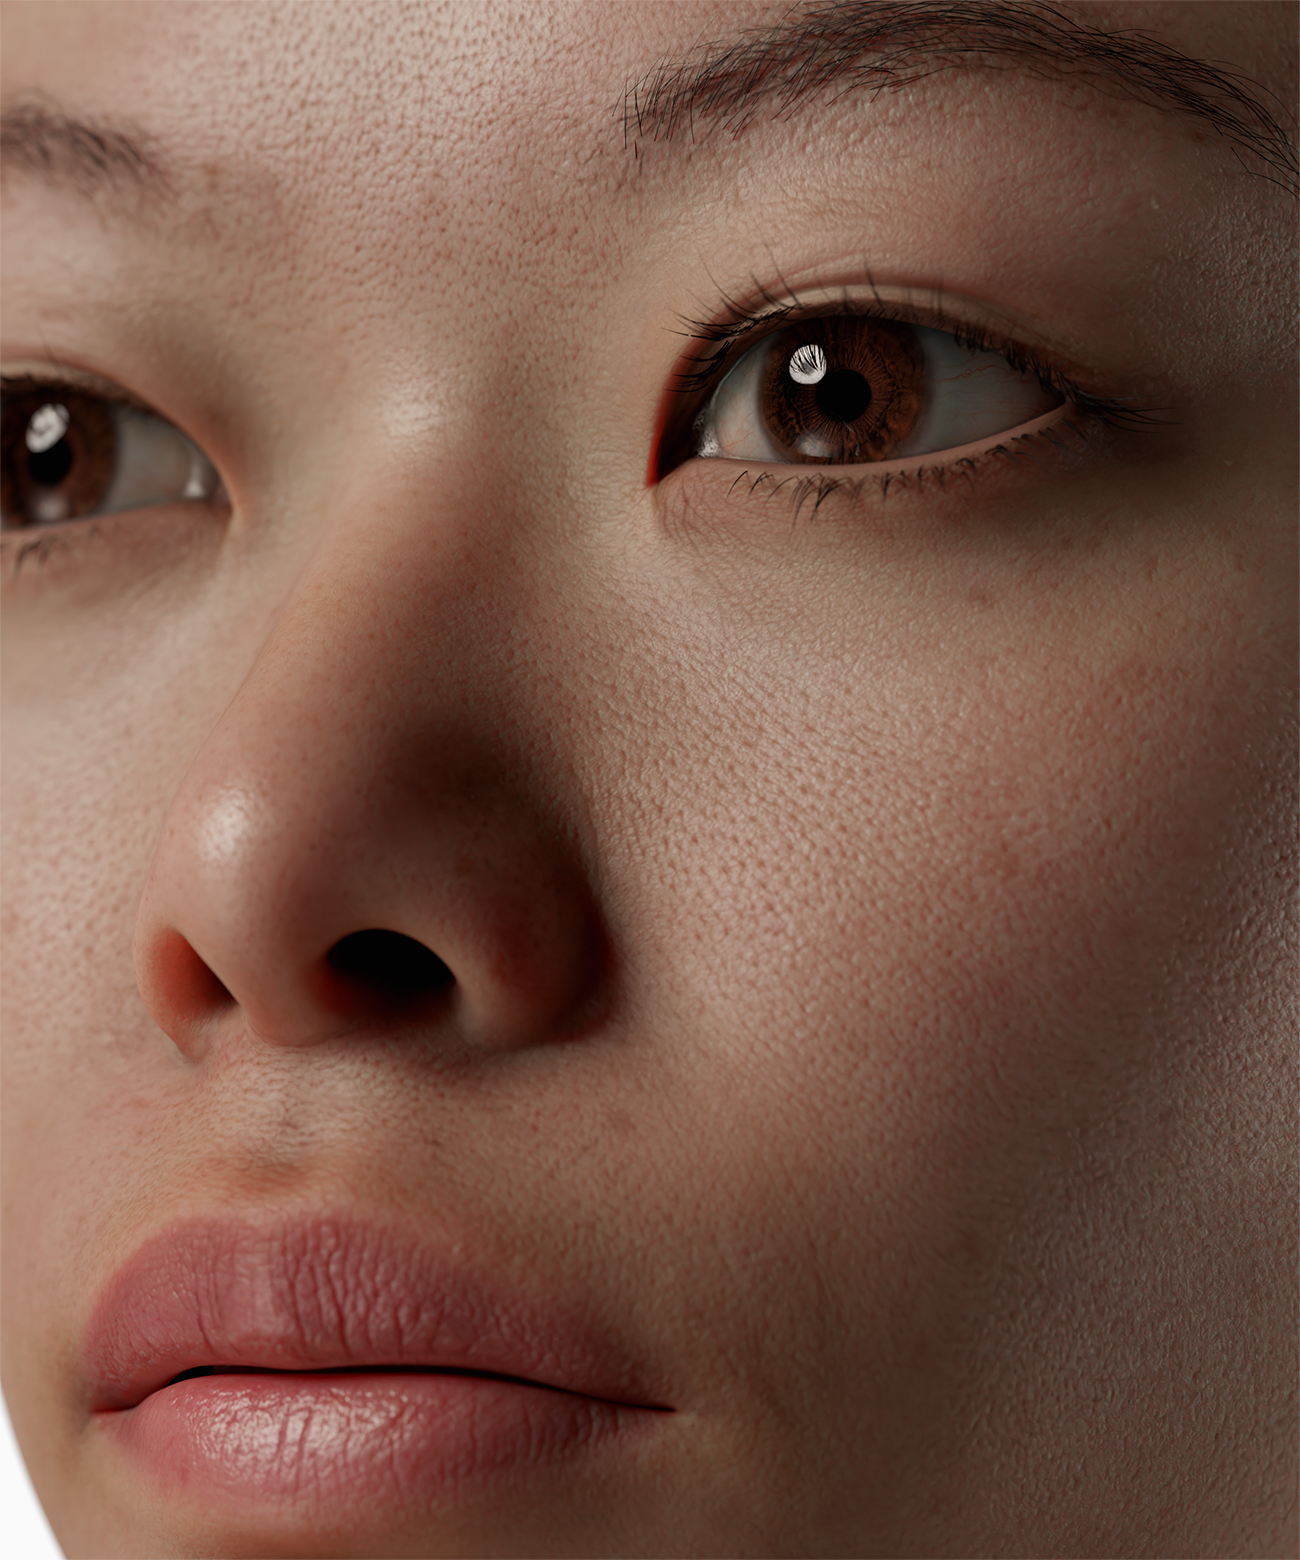 This 3D model features the head of an Asian woman in her 20's. The woman has a symmetrical face with distinct features, including almond-shaped eyes, a small nose, and full lips. The model has a high level of detail, including visible pores and fine lines on the skin. The woman's hair is styled in a classic cut with long layers, adding to her overall natural beauty. The model could be used in a variety of projects, including virtual reality simulations and video game characters.